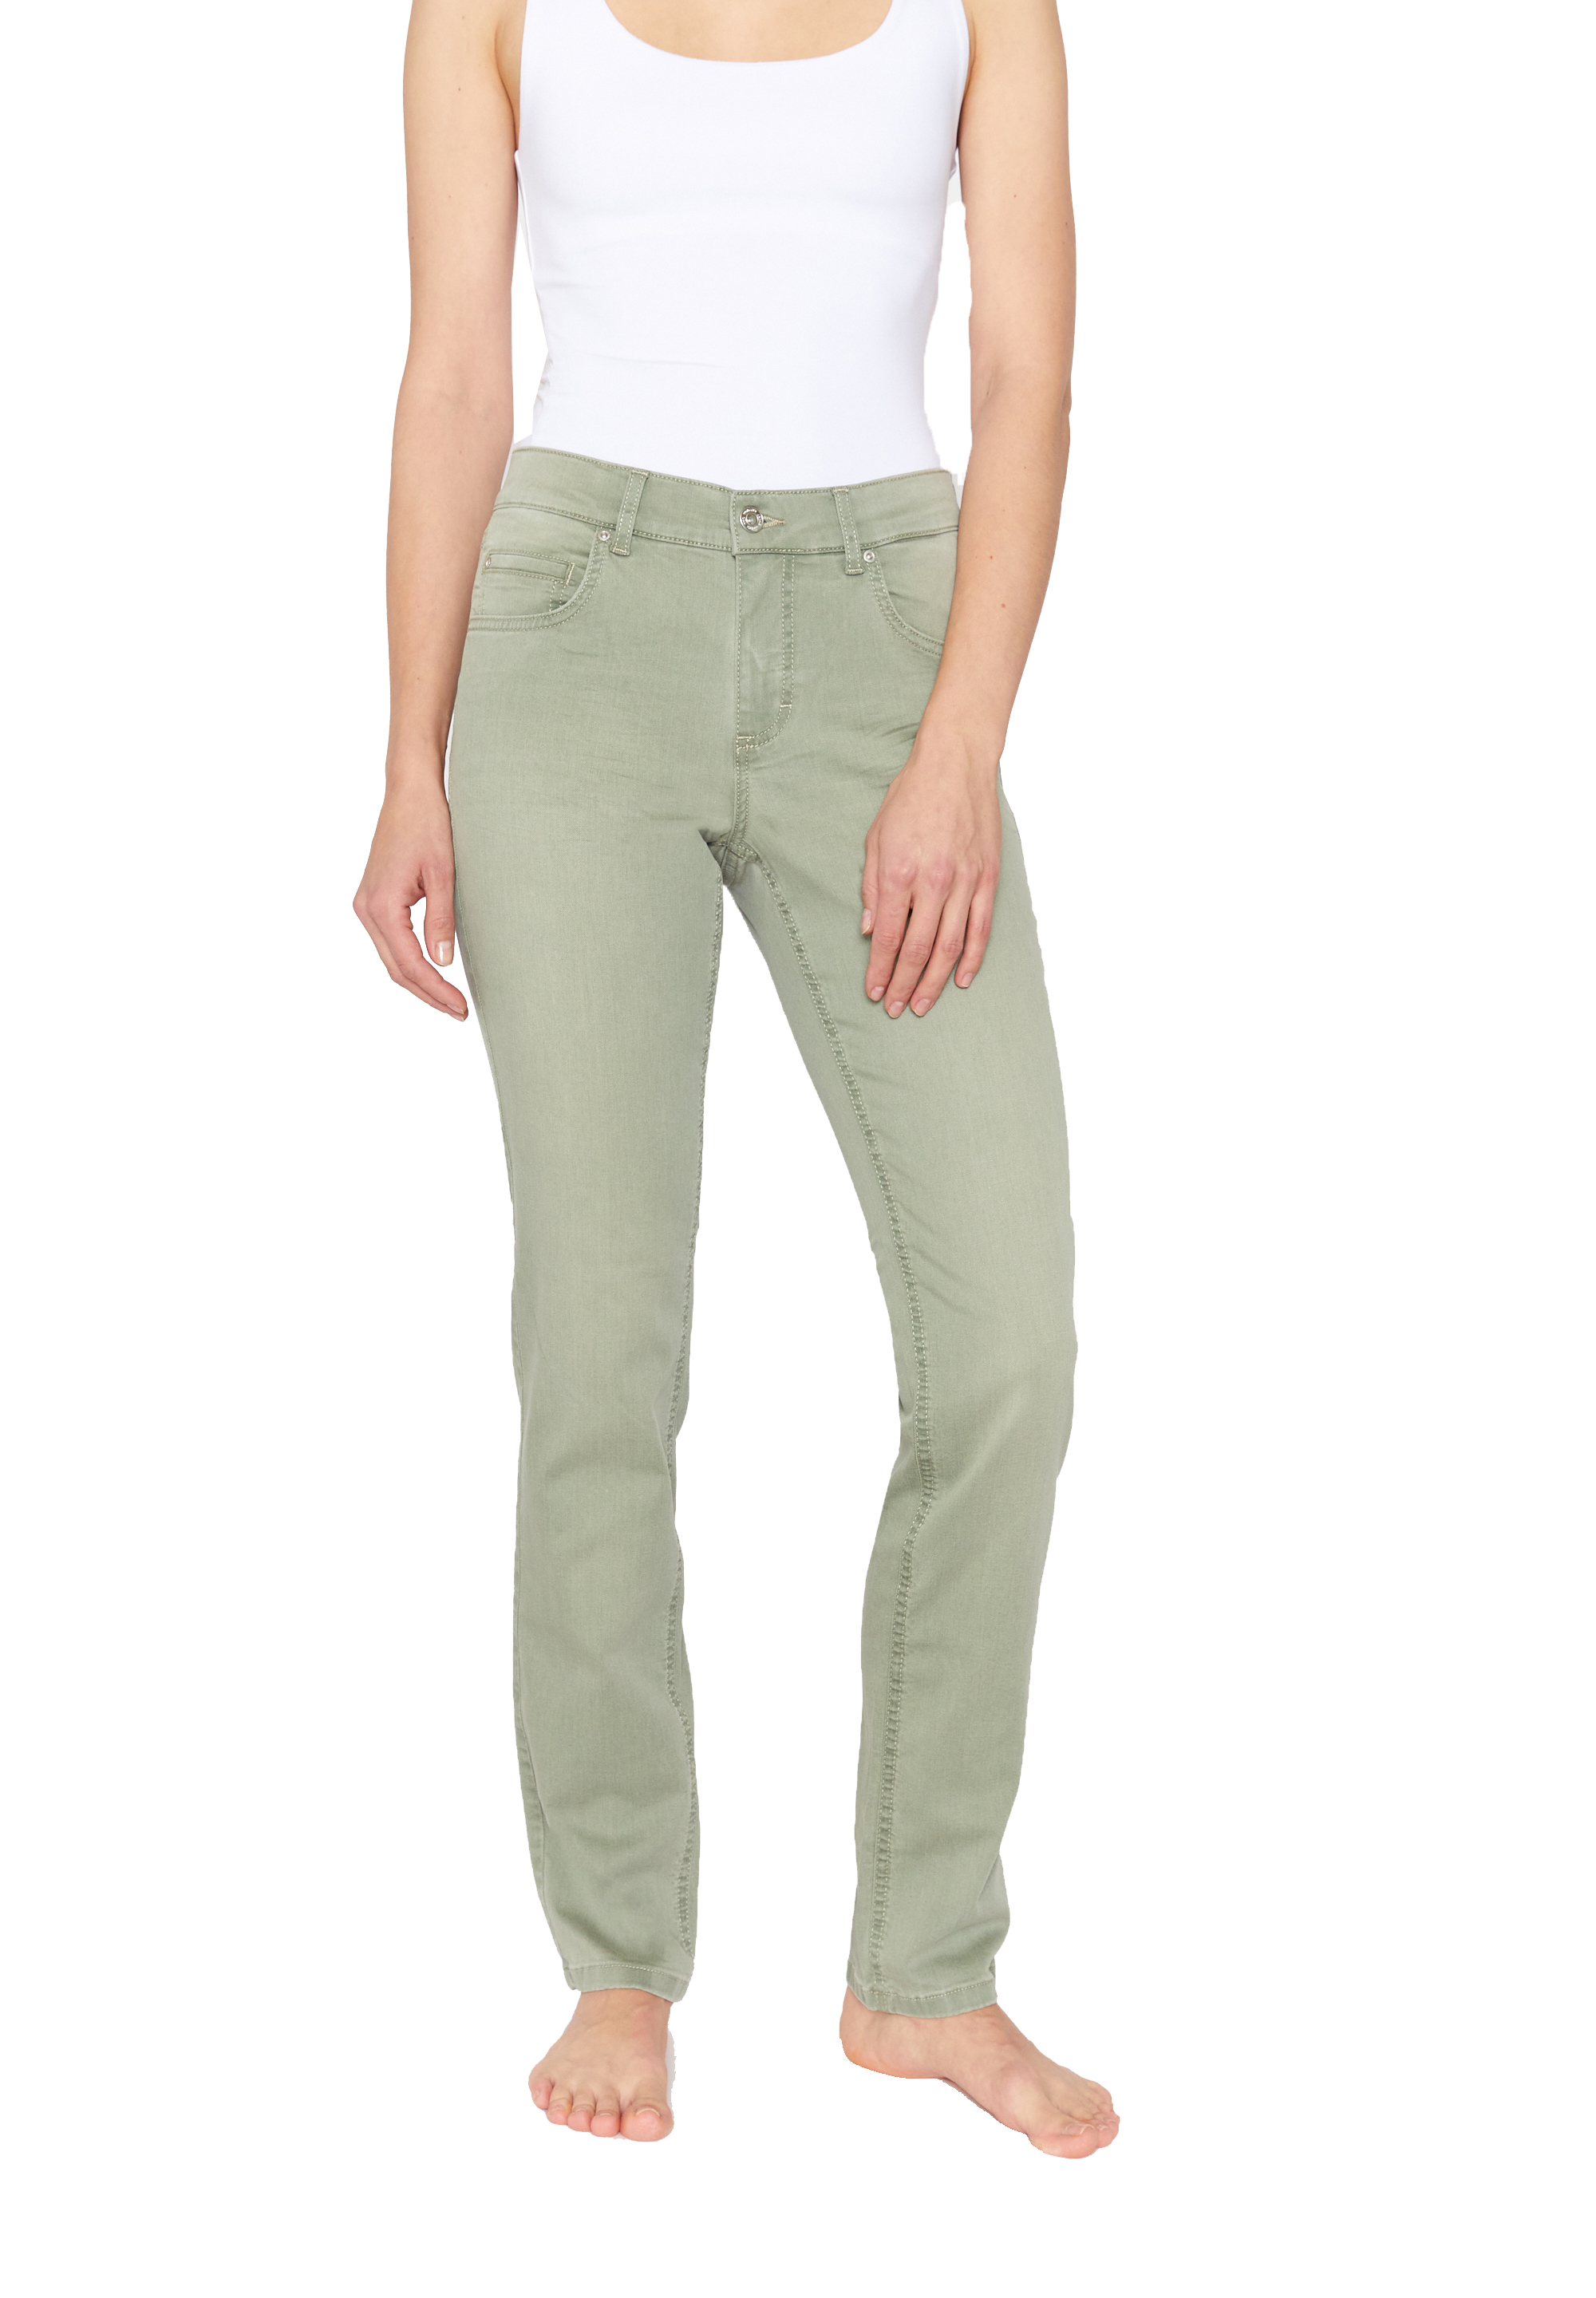 Angels Damen Jeans Cici - dusty olive 36/30